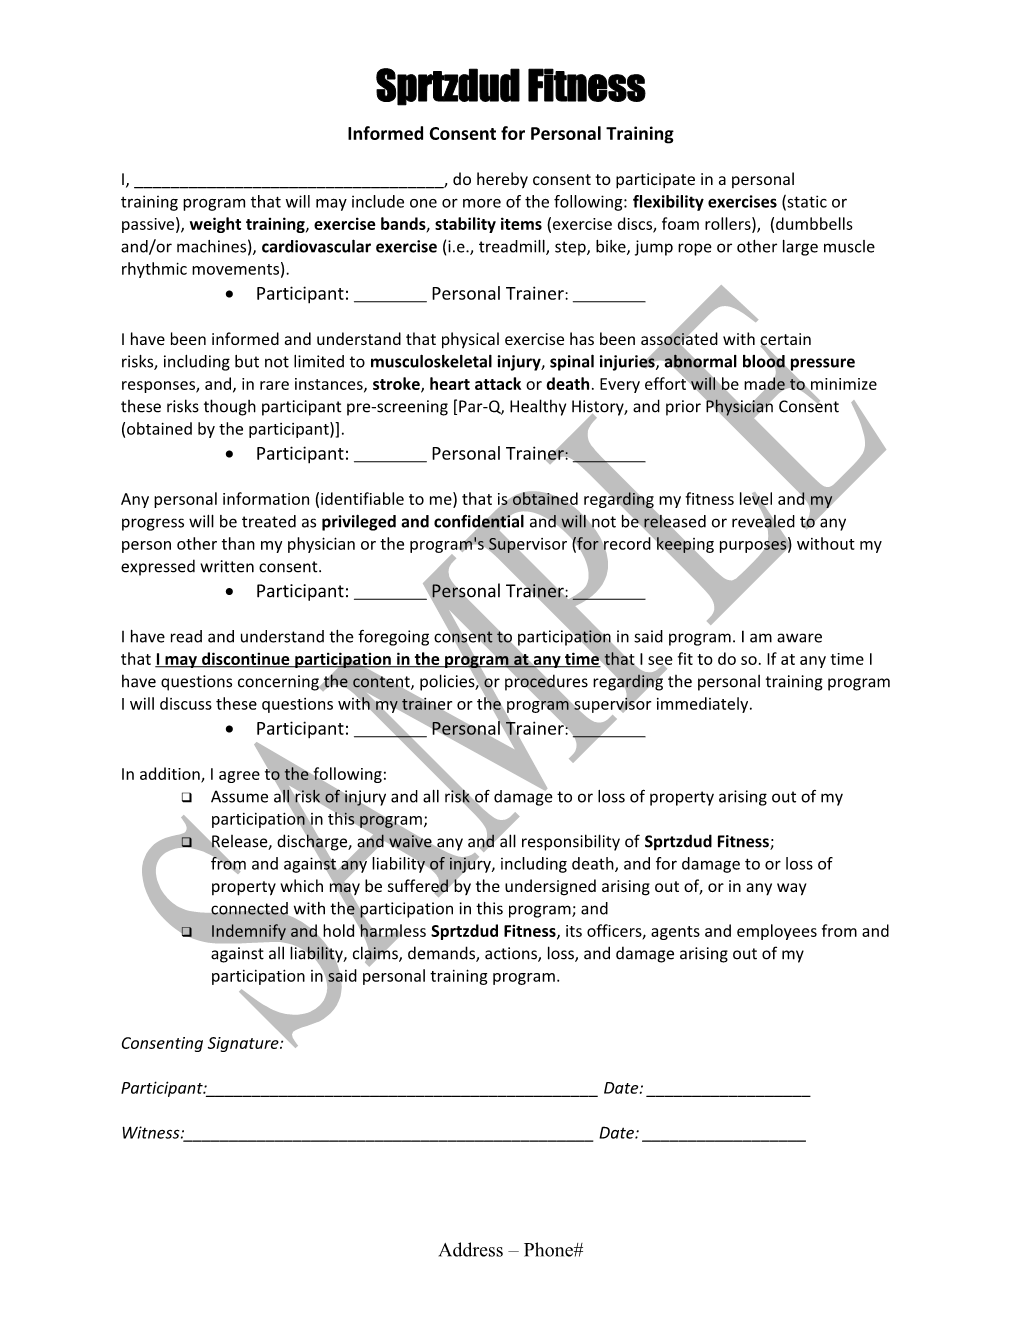 Informed Consent for Personal Training